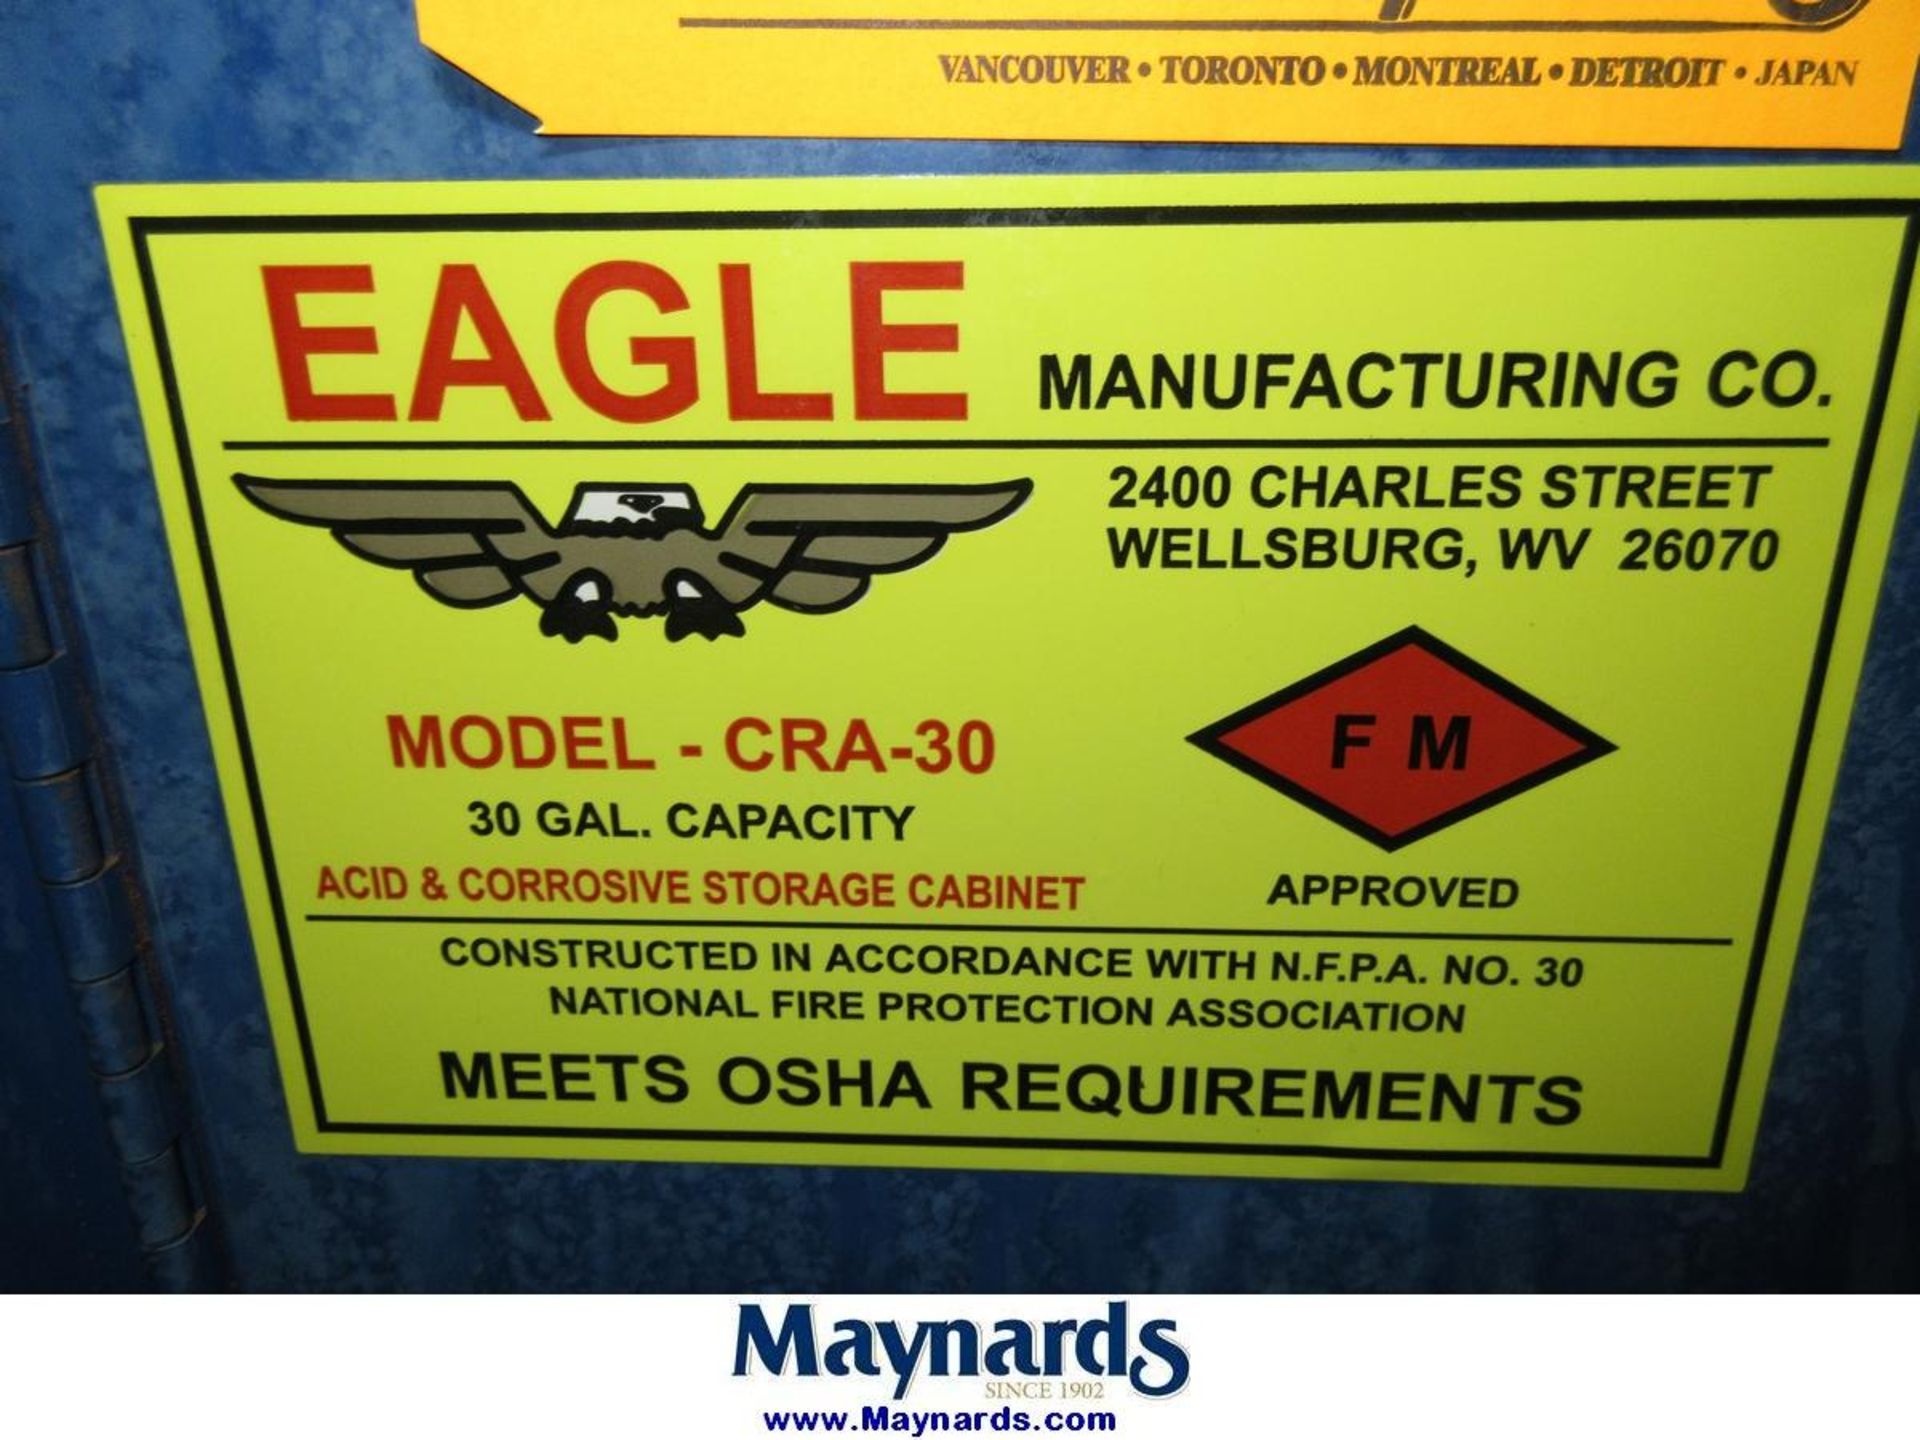 Eagle Manufacturing Co. CRA-30 Acid and Corrosives Storage Cabinet - Image 3 of 3